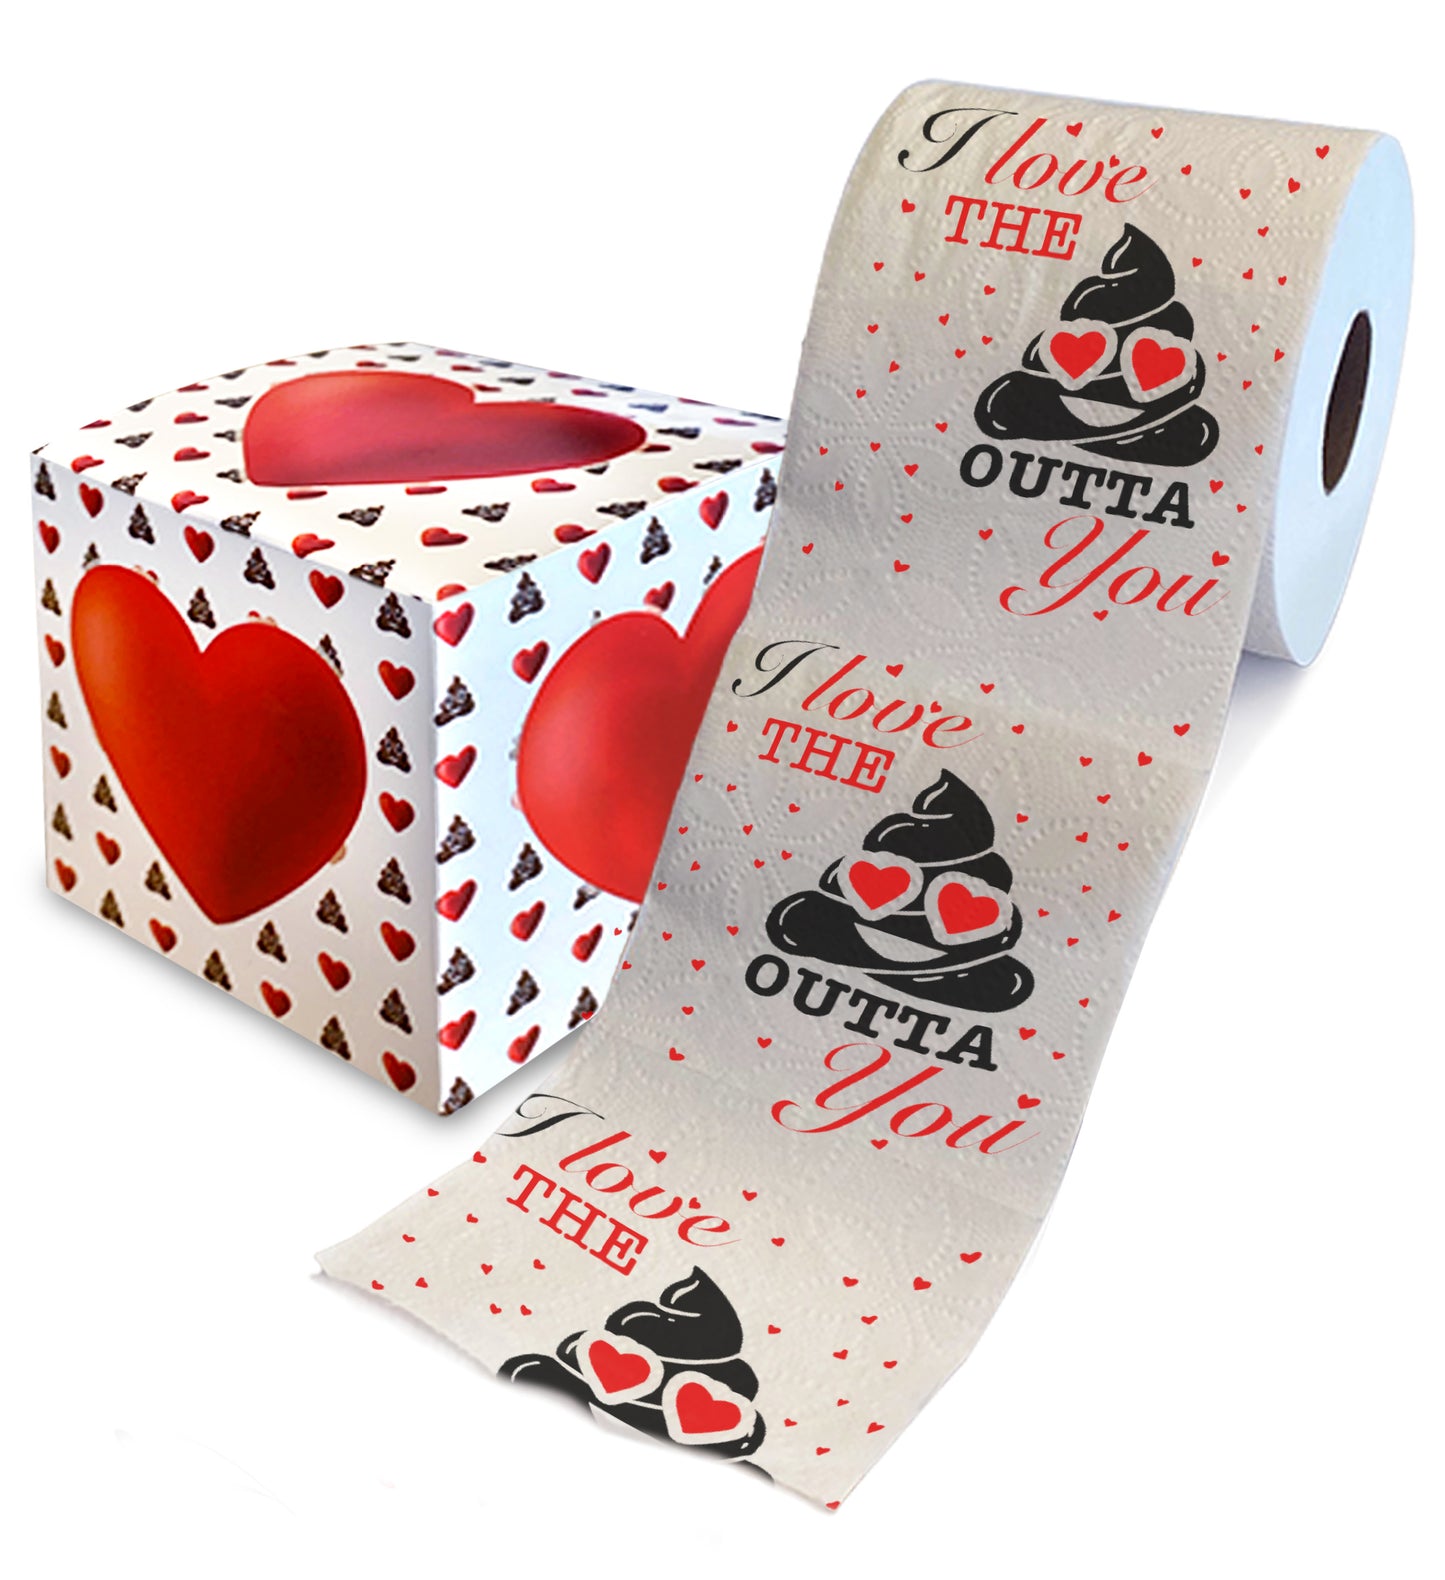 Printed TP I Love The Poop Outta You Valentines Printed Toilet Paper, 500 Sheet